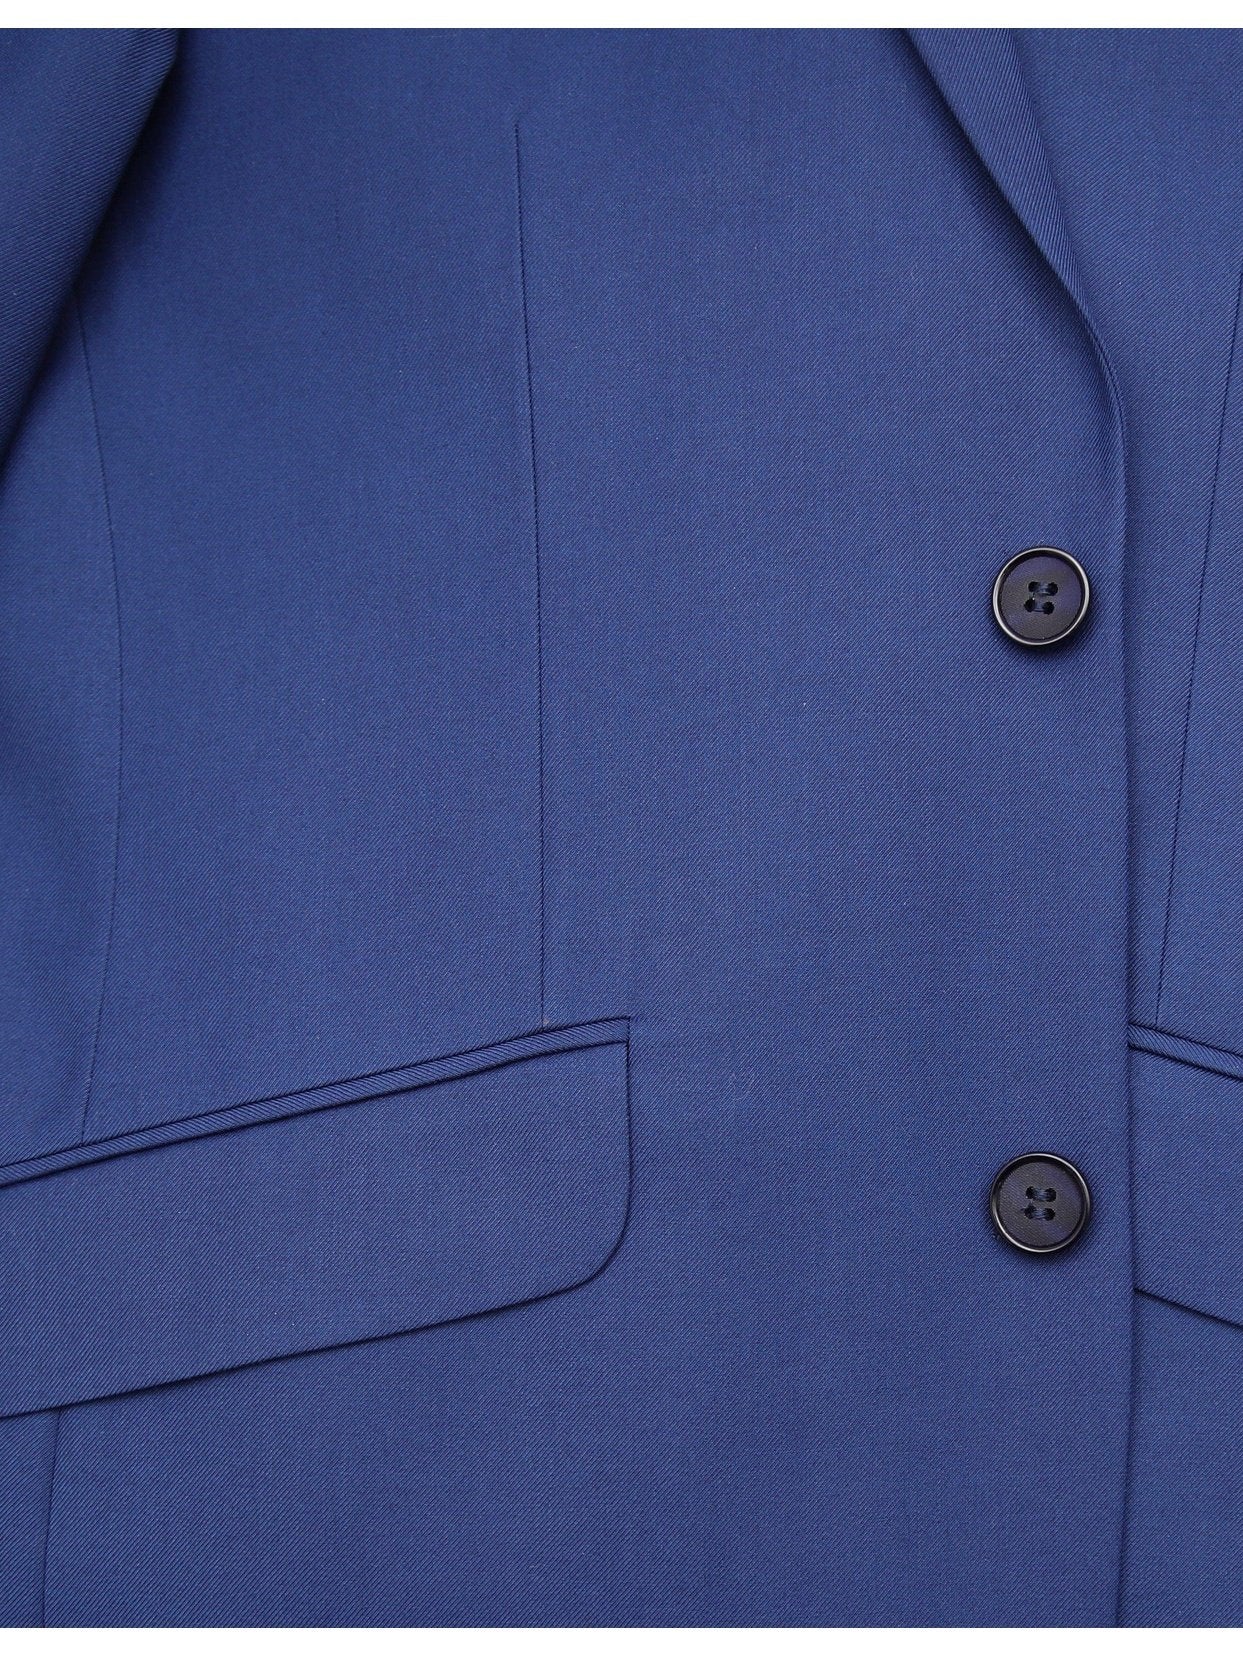 close up of French blue men's suit buttons